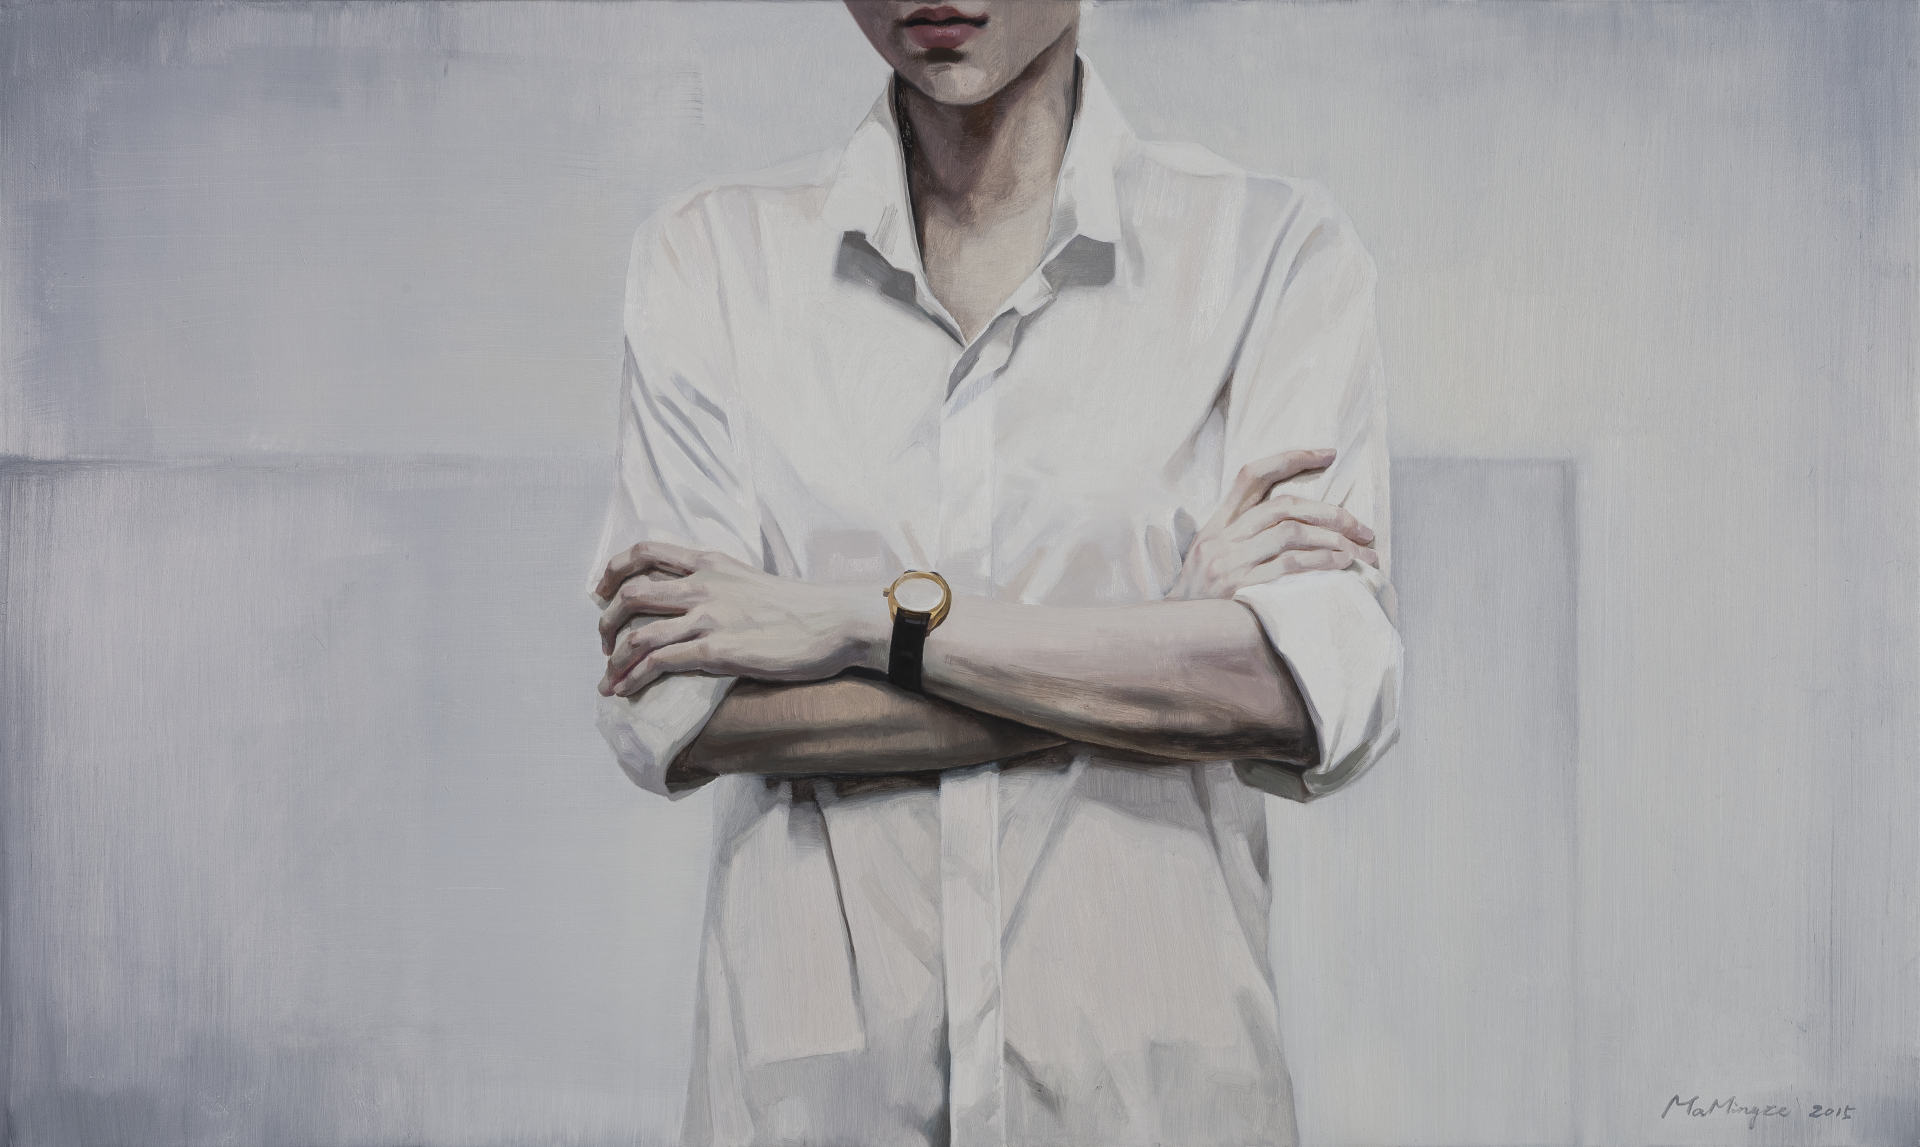 Ma Mingze's oil on canvas work named 'The Watch Isn't a Timepiece' is on display at her solo exhibition at Parkview Green Art in Beijing's 798 Art Zone. Her first-ever exhibition will run from July 8 to August 20, 2017. [Photo provided to China Plus]